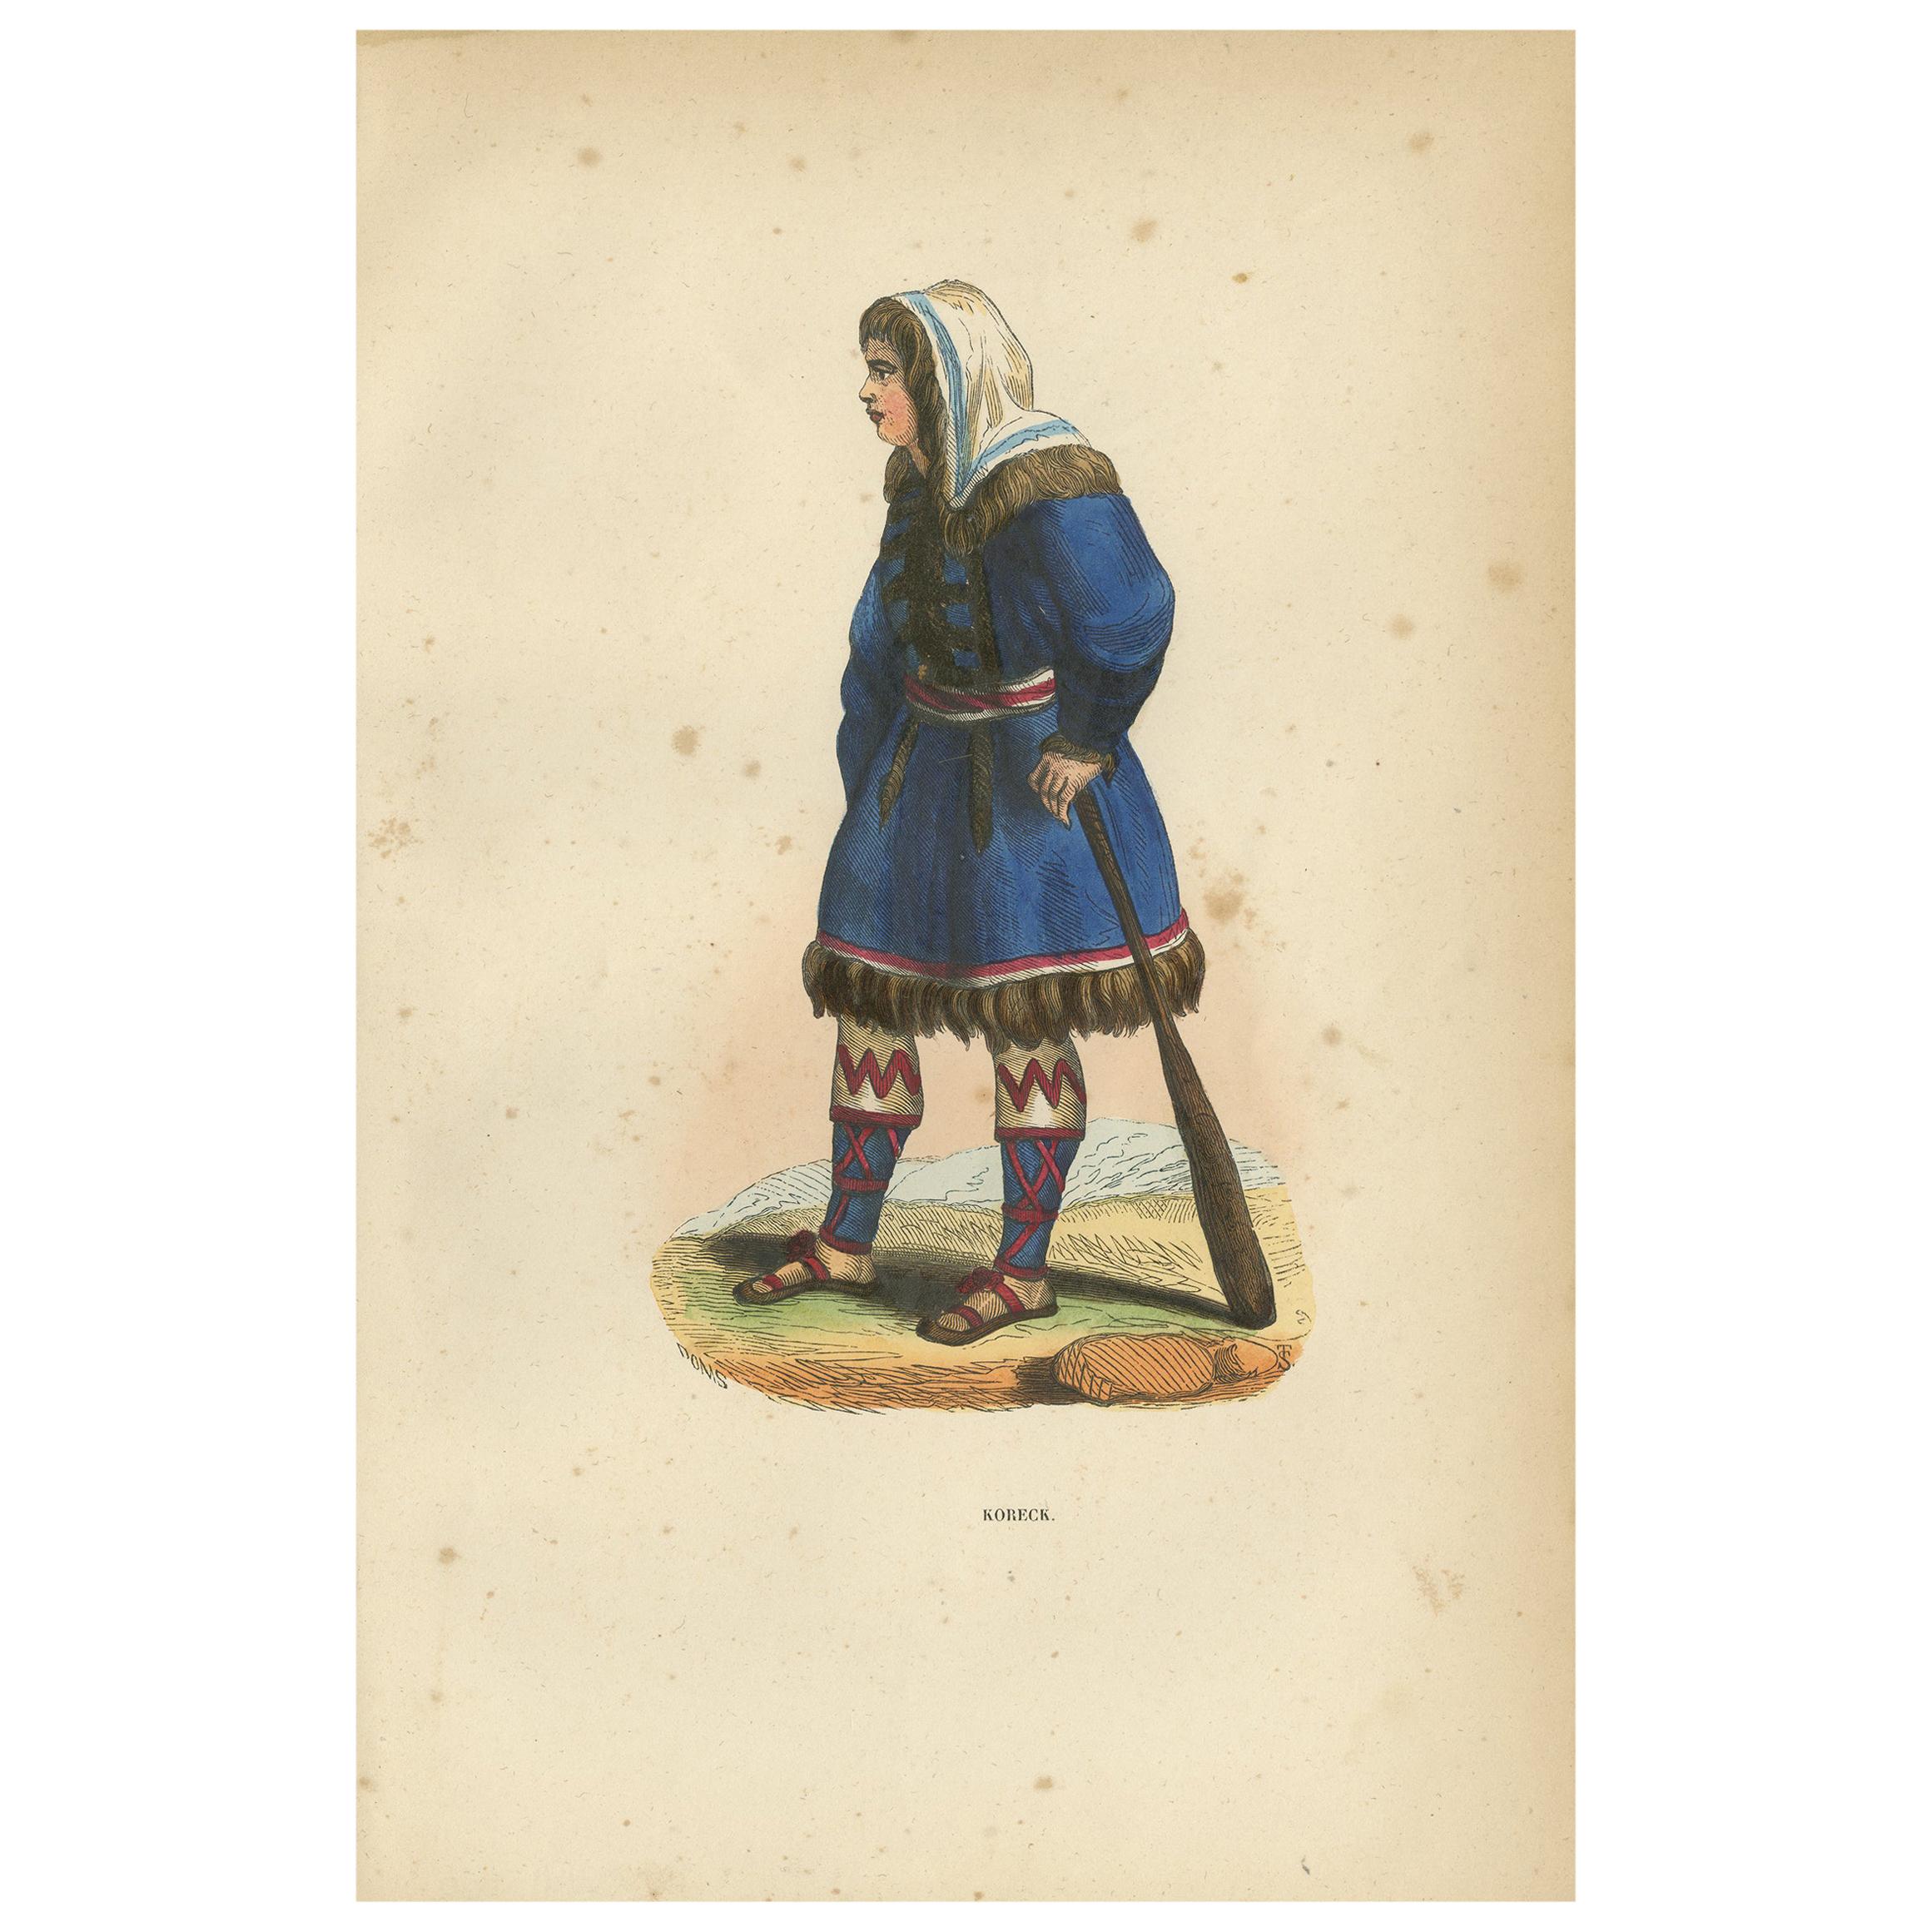 Antique Print of a Koryak, indigenous people of the Russian Far East, Kamchatka